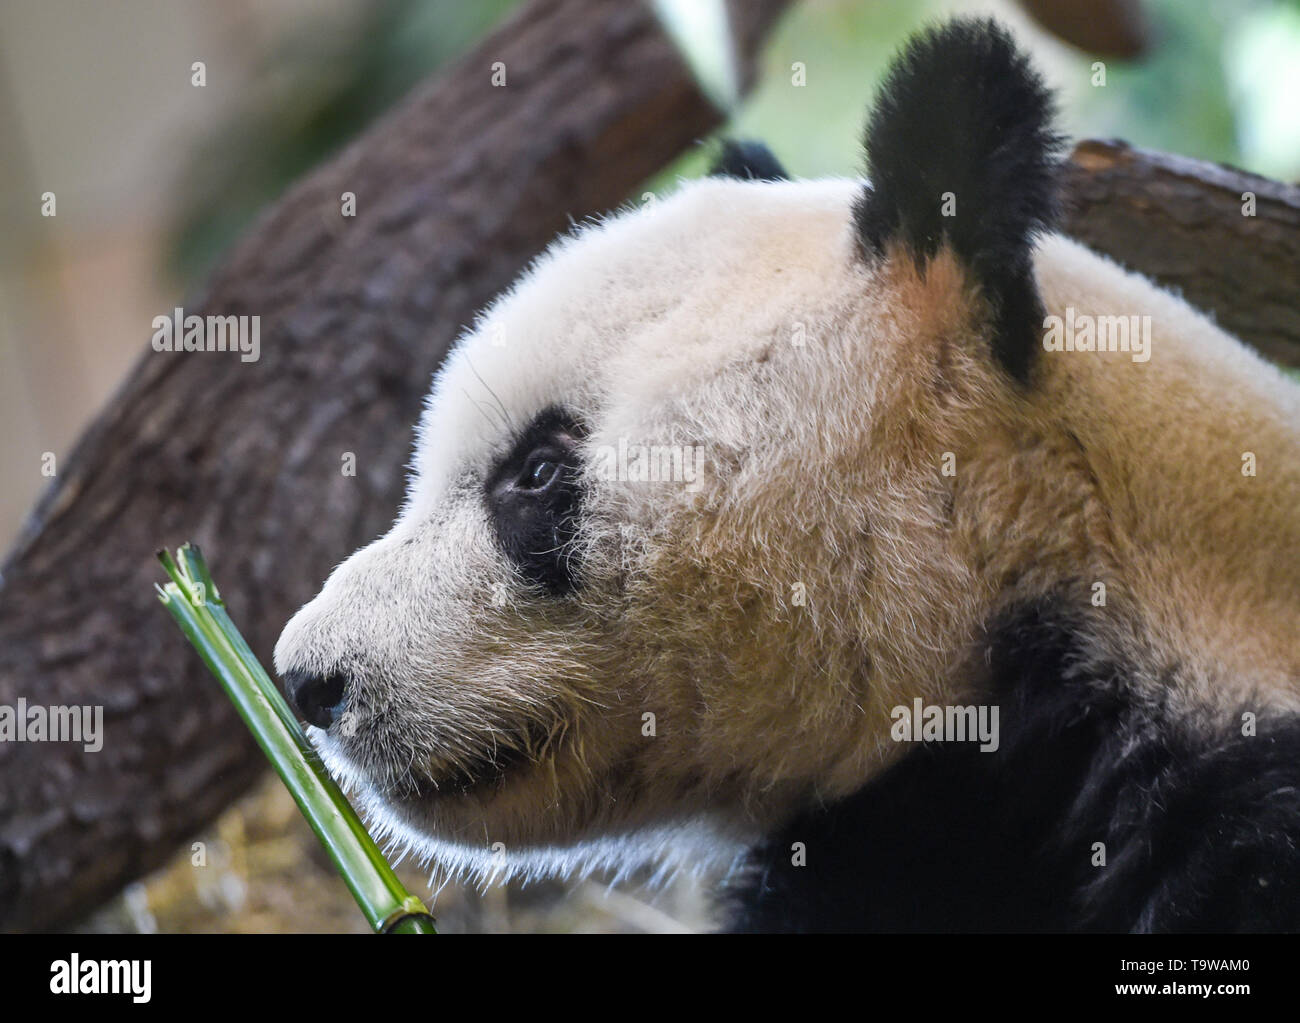 Vienna, Austria. 20th May, 2019. Giant panda Yuan Yuan is seen at the Schoenbrunn Zoo in Vienna, Austria, on May 20, 2019. Giant panda Yuan Yuan was officially handed over to the zoo in a grand ceremony on Monday morning. Yuan Yuan is a 19-year-old male who has been in Vienna since mid-April and quarantined for a month before visitors could take a look at him. Credit: Guo Chen/Xinhua/Alamy Live News Stock Photo